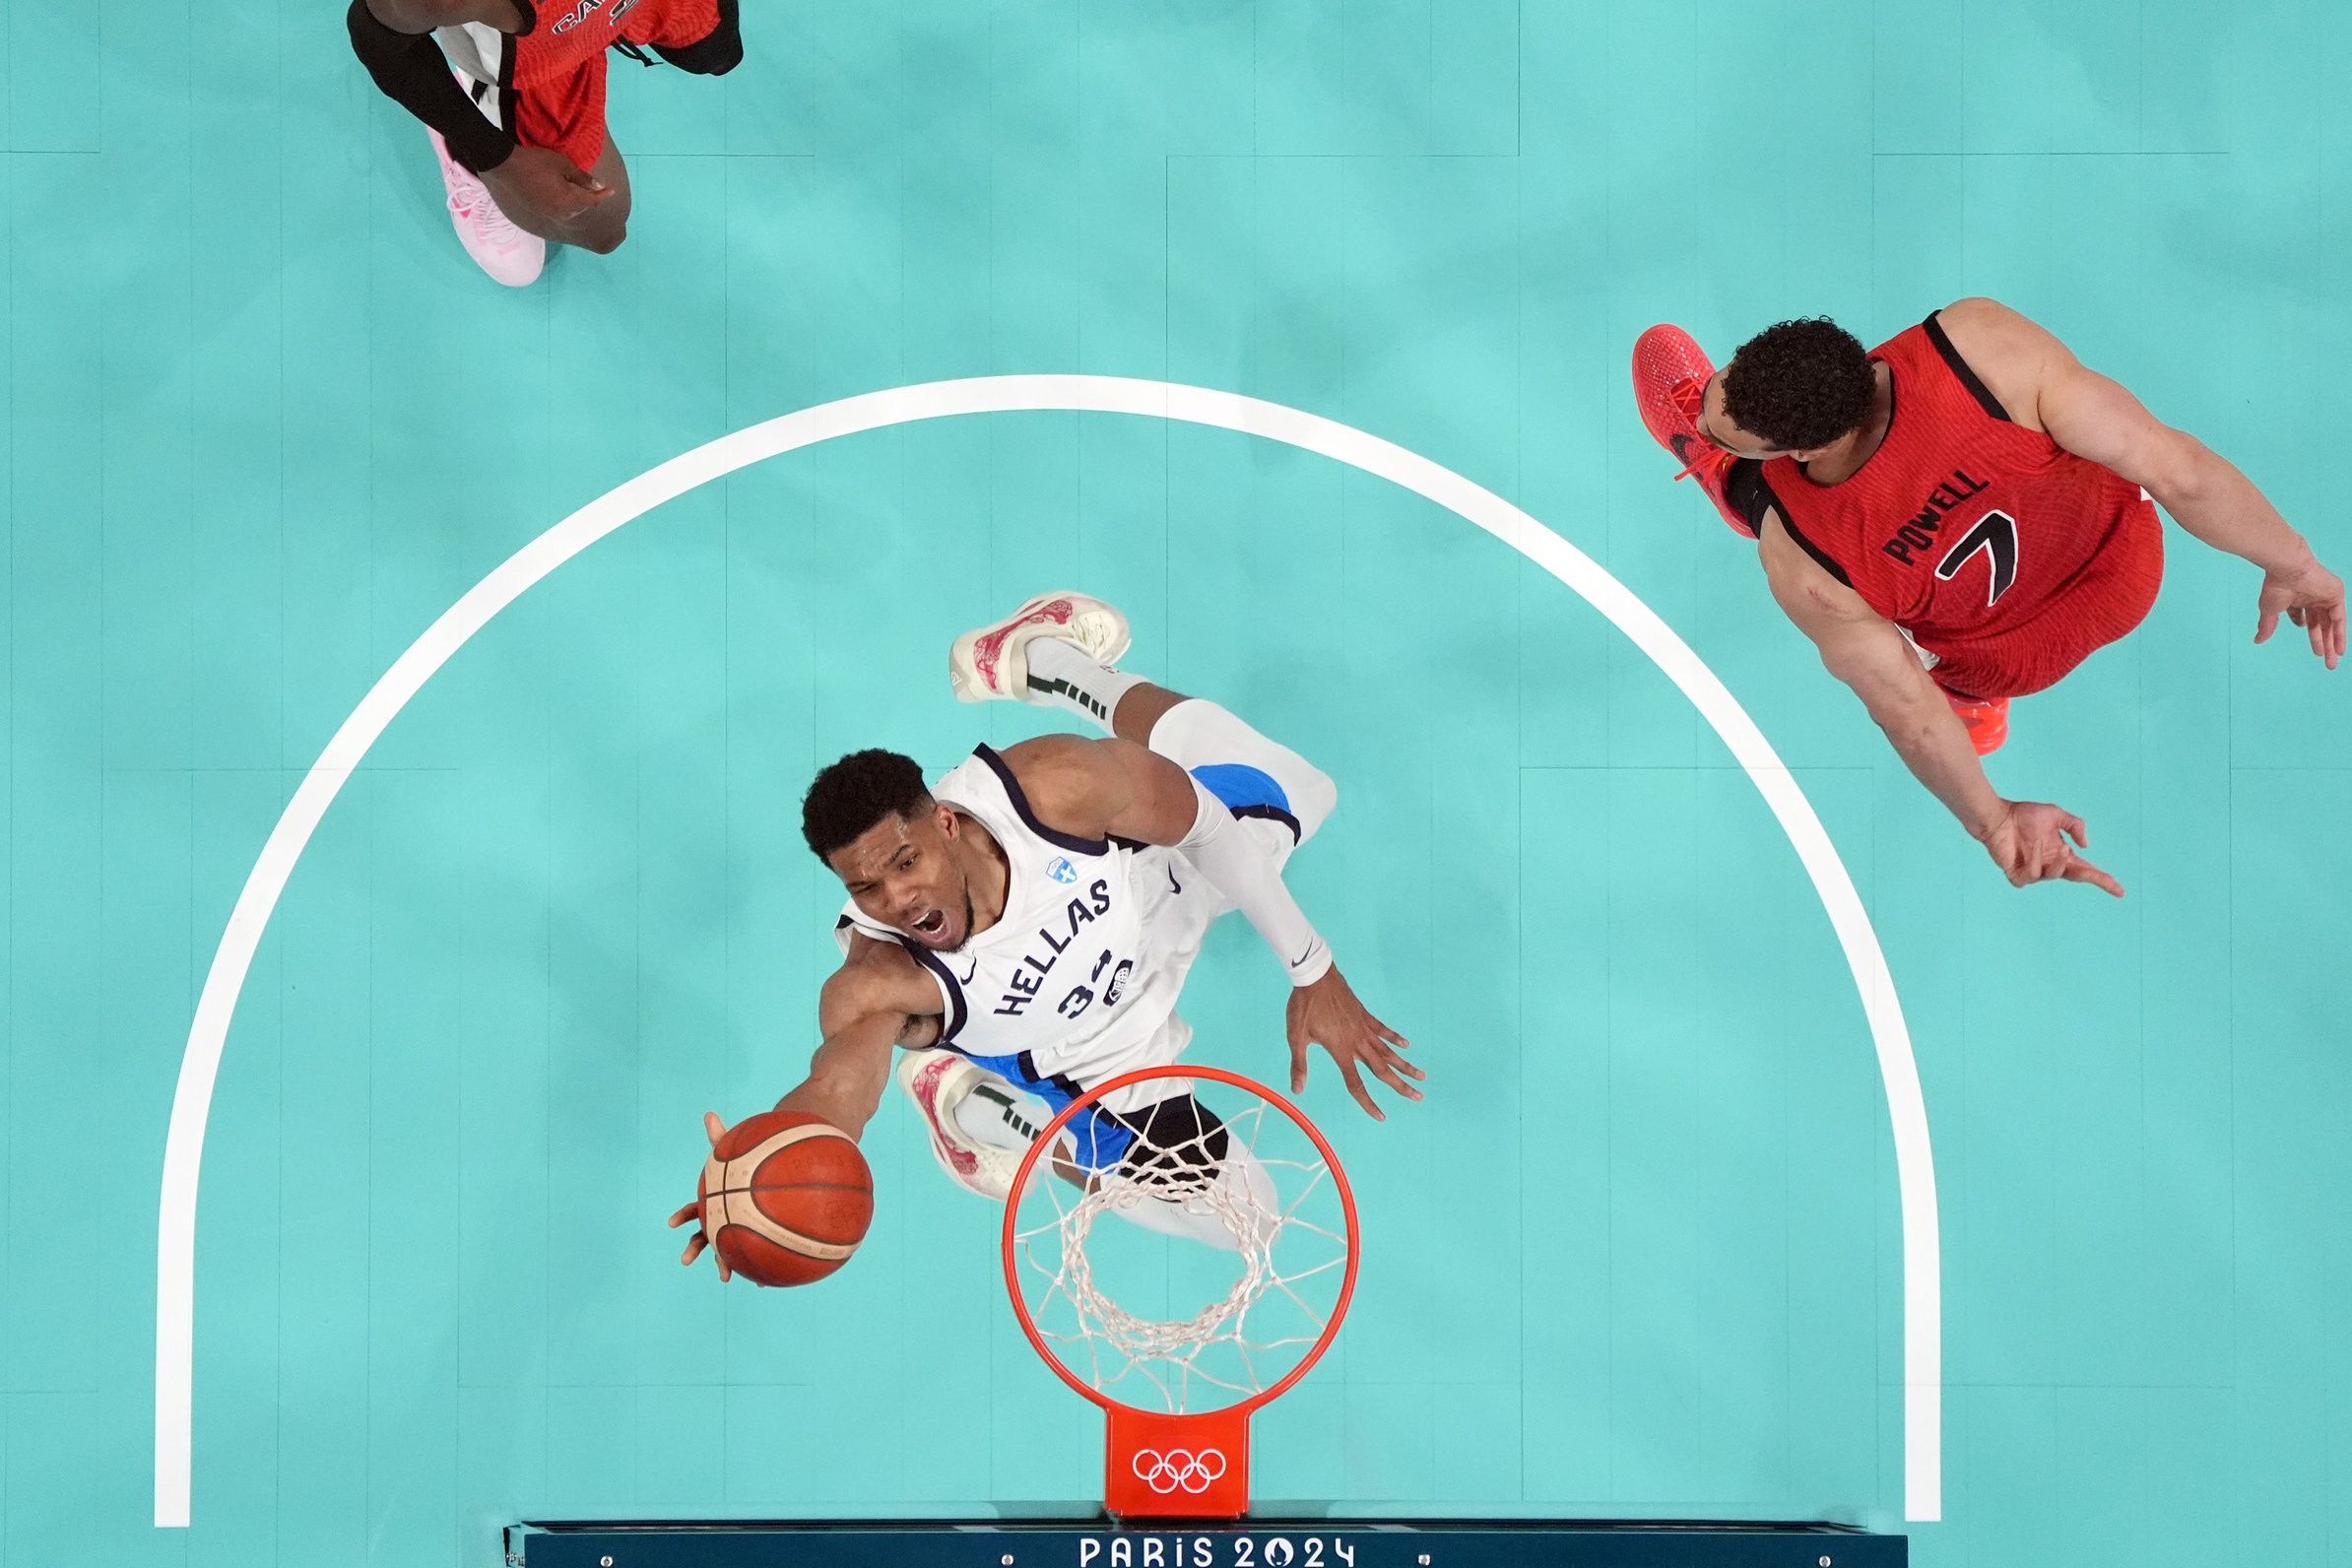 Giannis and team Greece are apart of our 12-7 Olympic basketball power rankings.